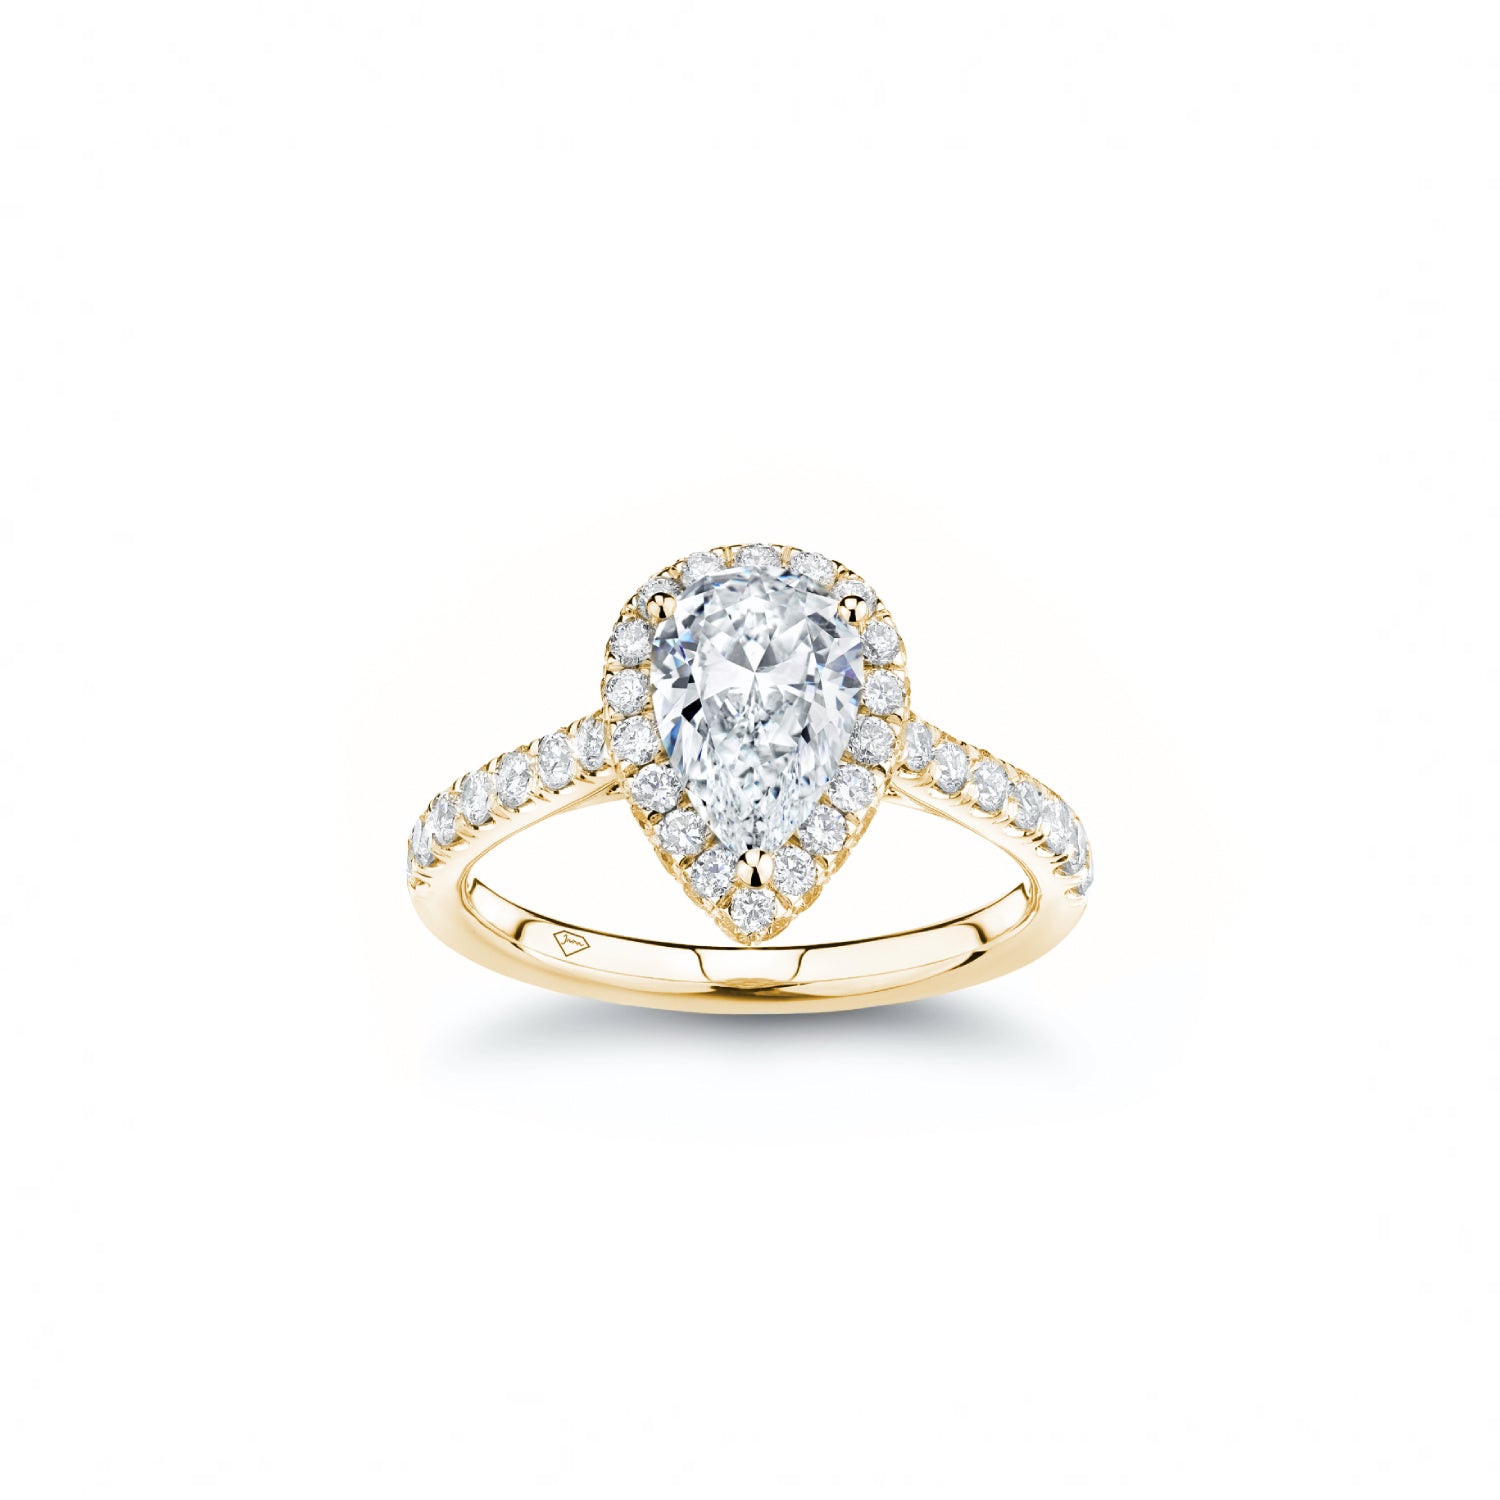 Pear-Shaped Diamond Halo Engagement Ring in Yellow Gold